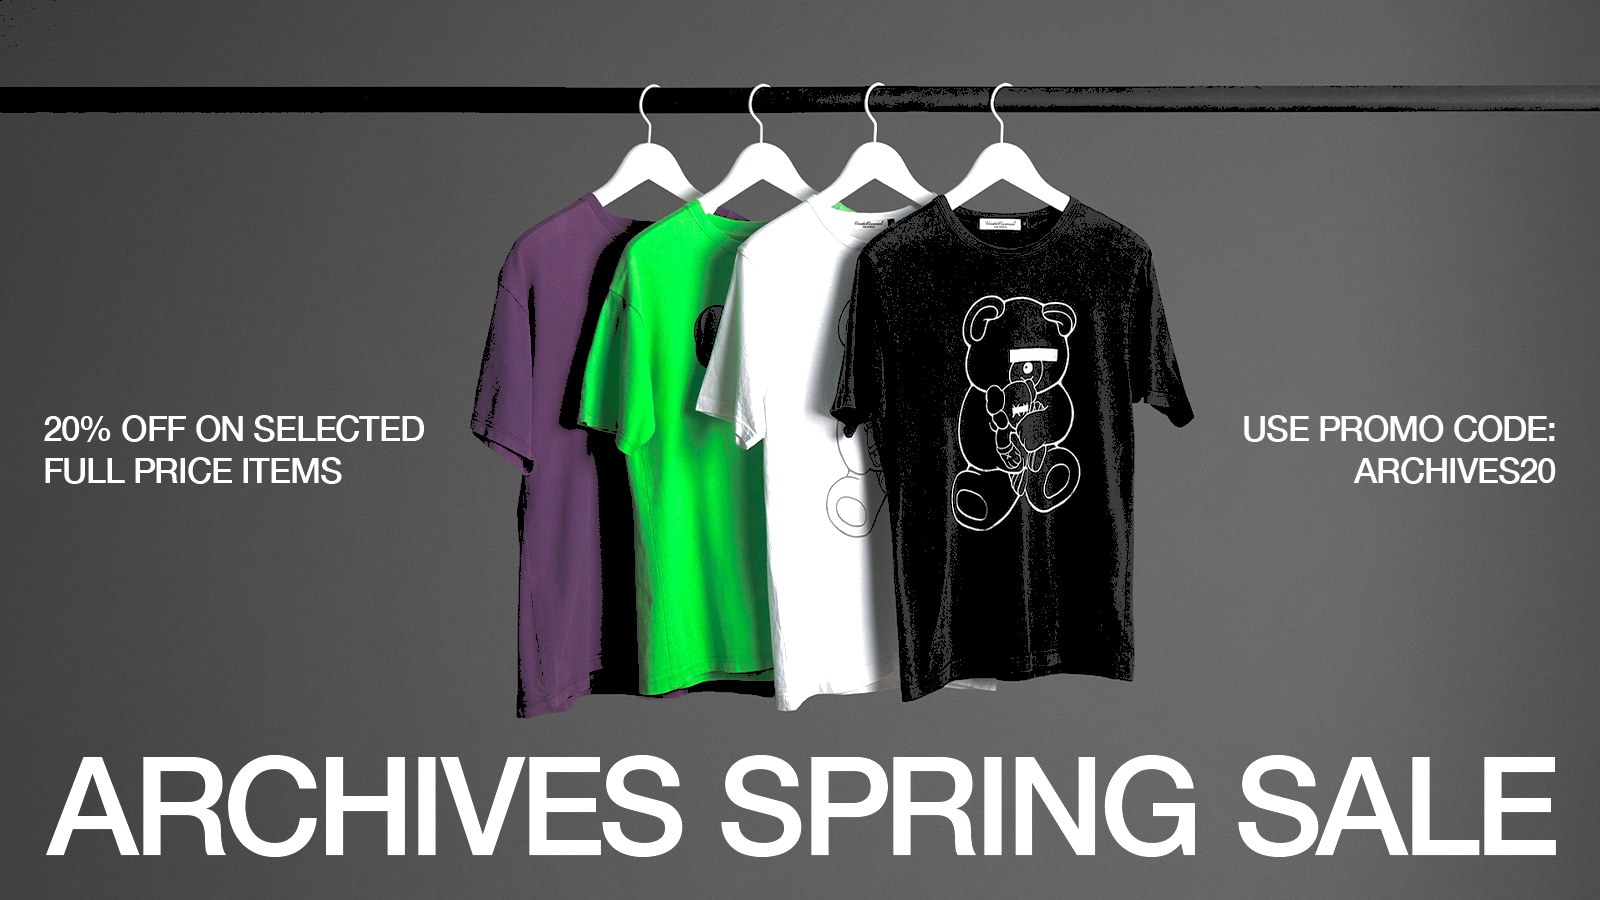 Archives Spring Sale: 20% Off on selected full price items